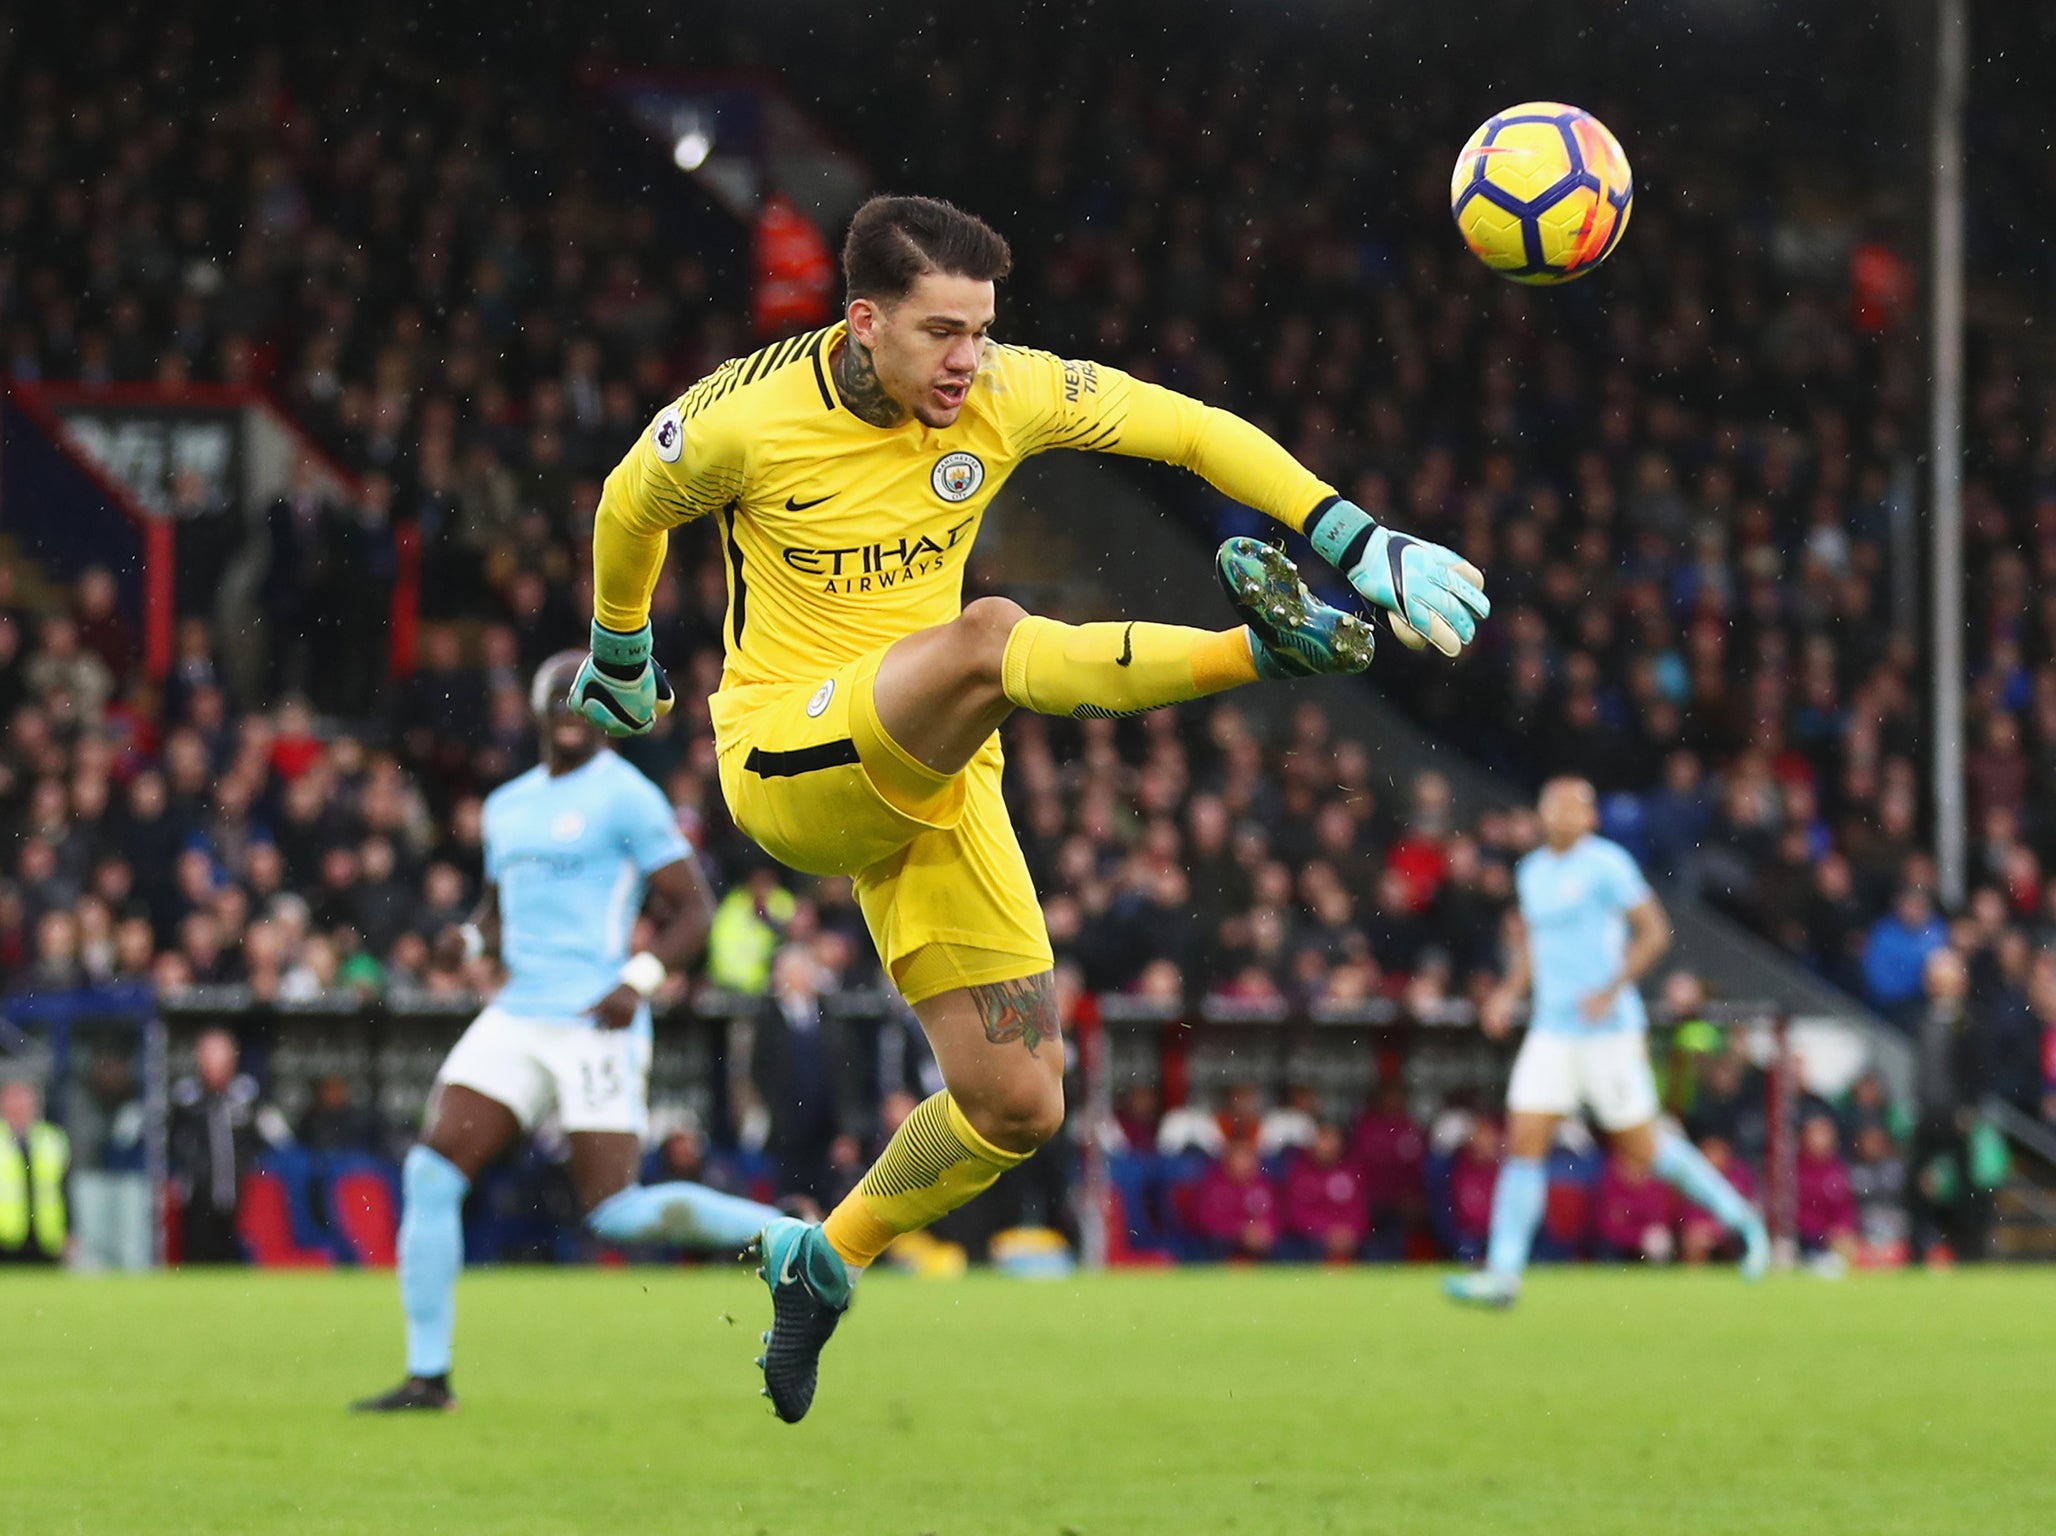 Ederson has been outstanding since his arrival last summer